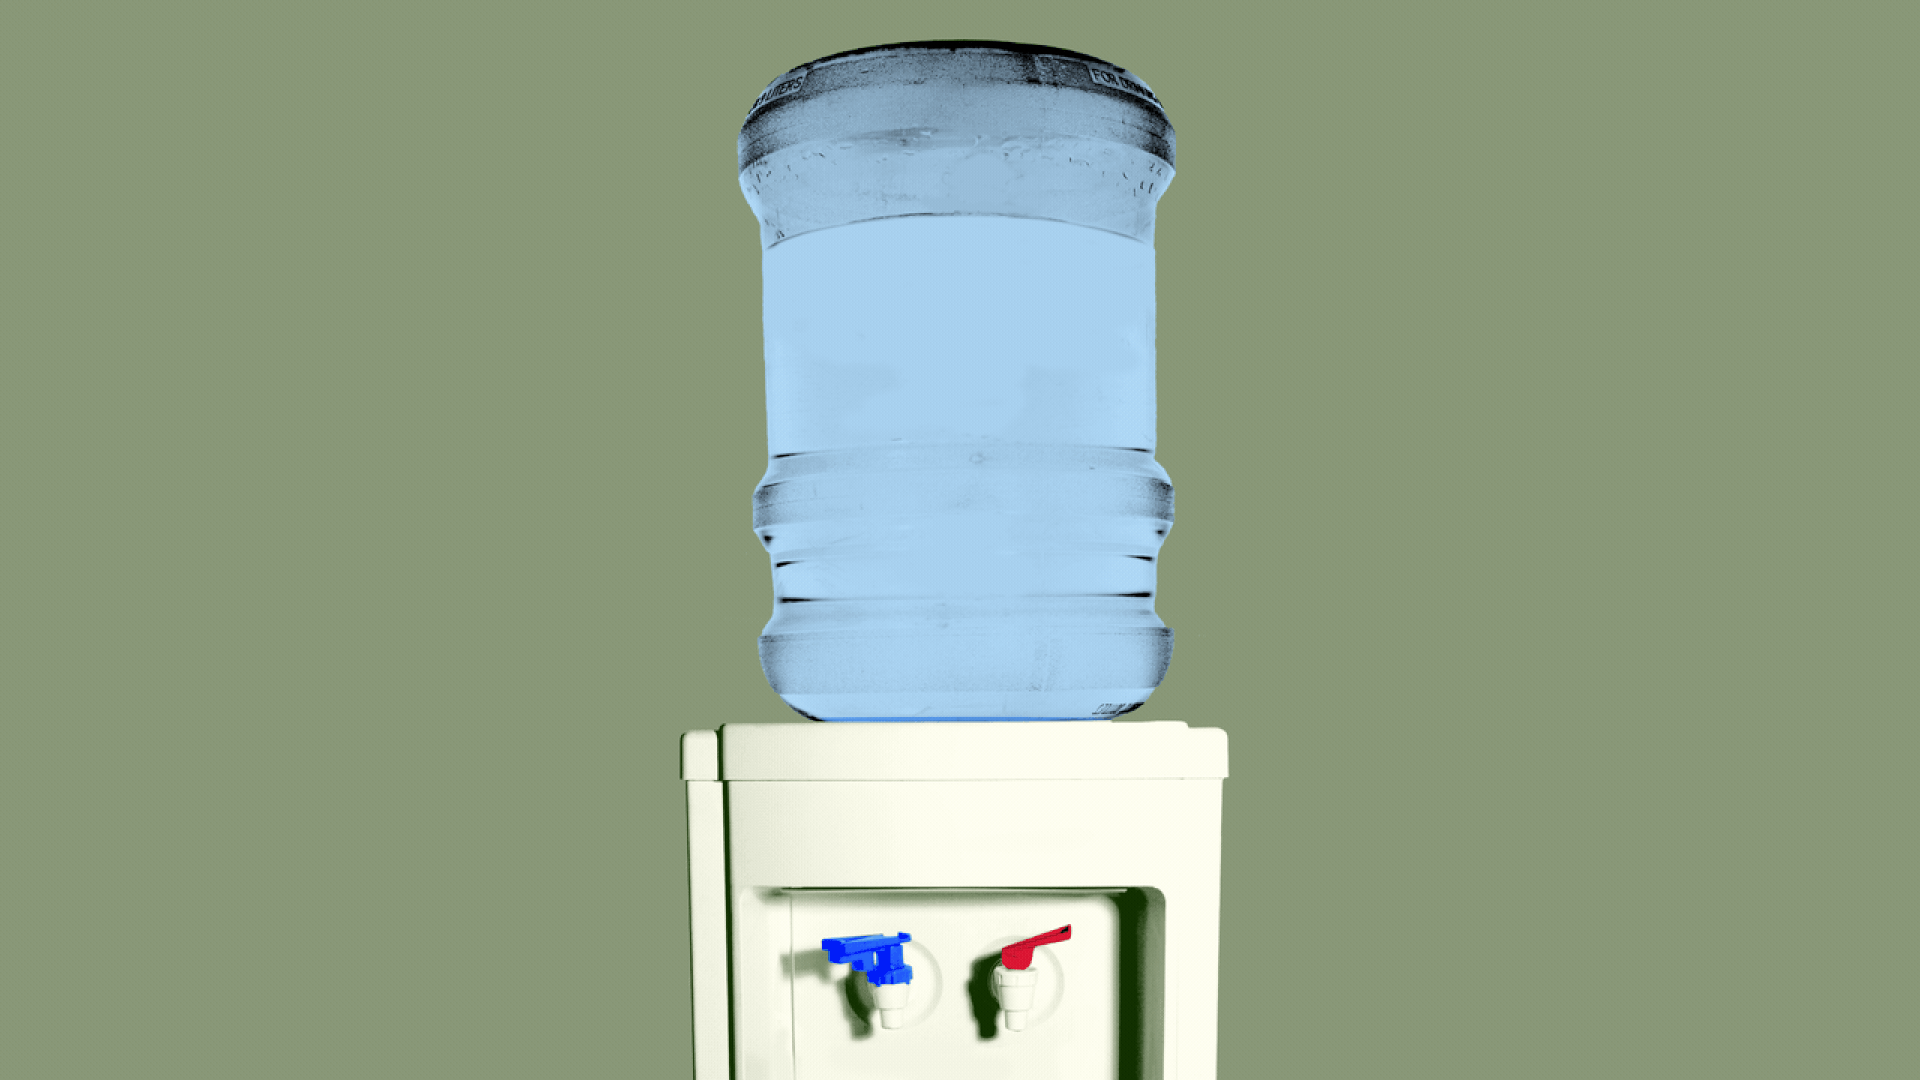 GIF of a water cooler filling up.